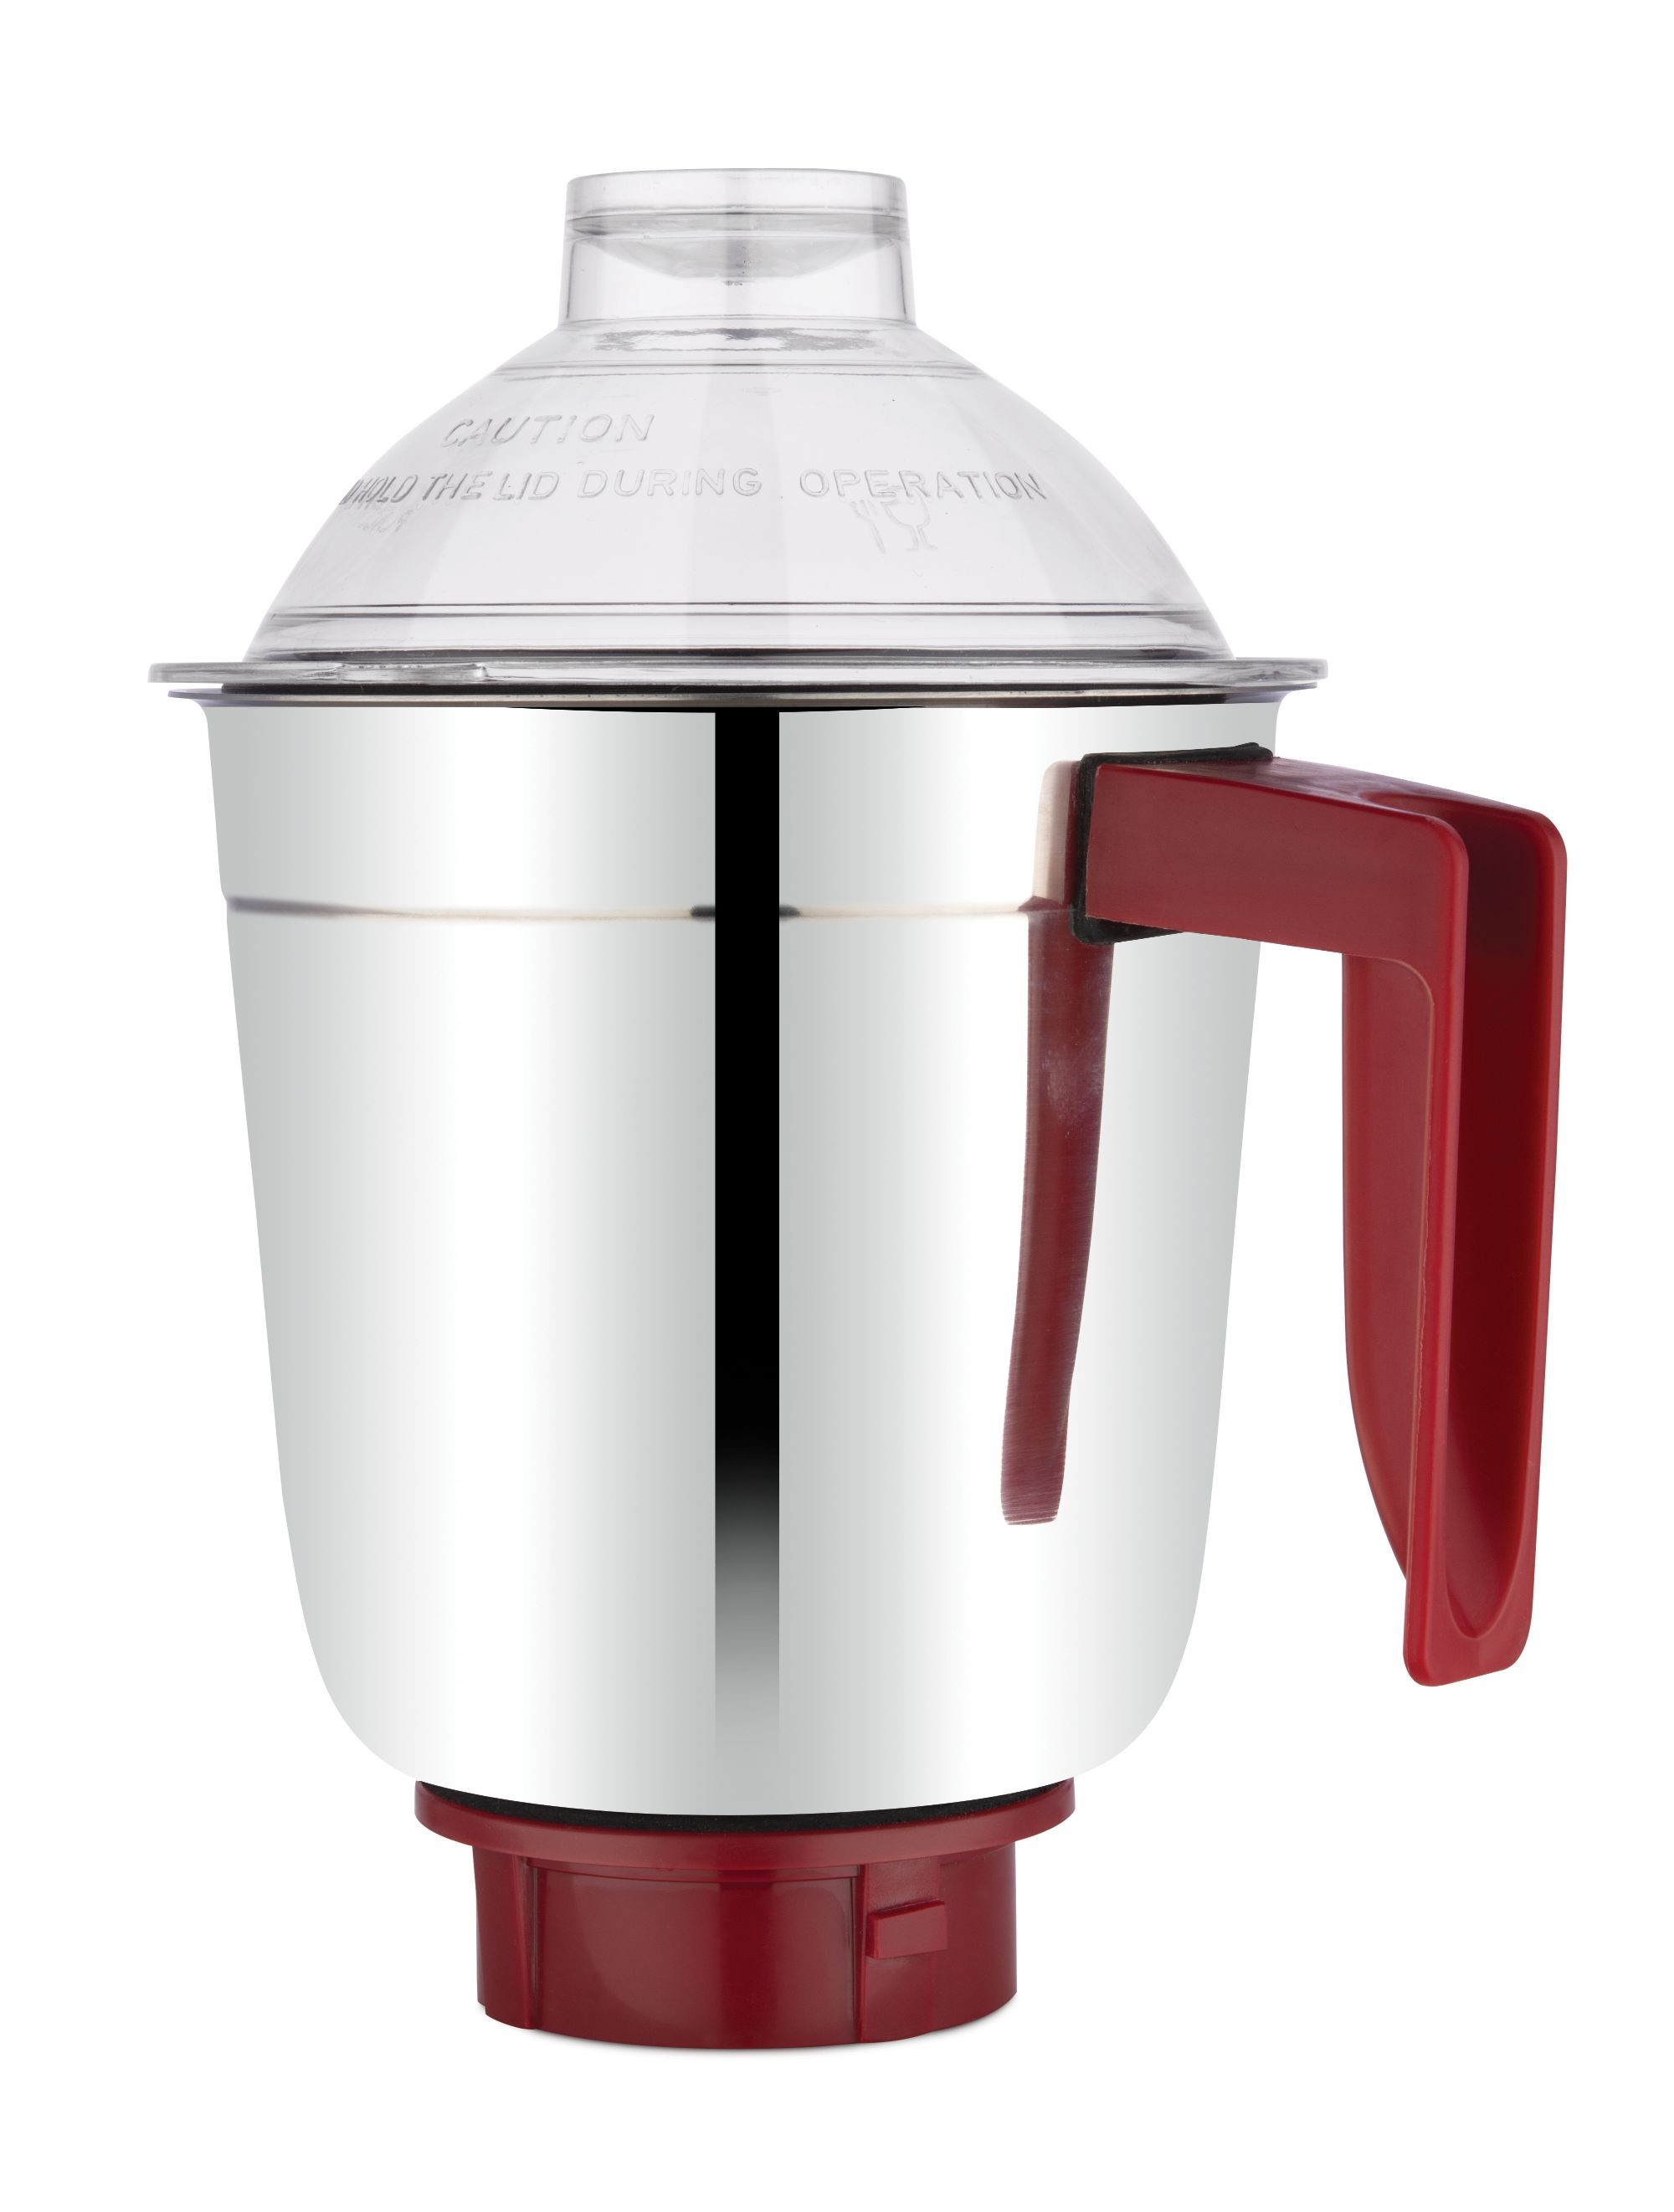 bajaj-classic-indian-mixer-grinder-600w-stainless-steel-jars-indian-mixer-grinder-spice-coffee-grinder-110v-for-use-in-canada-usa9